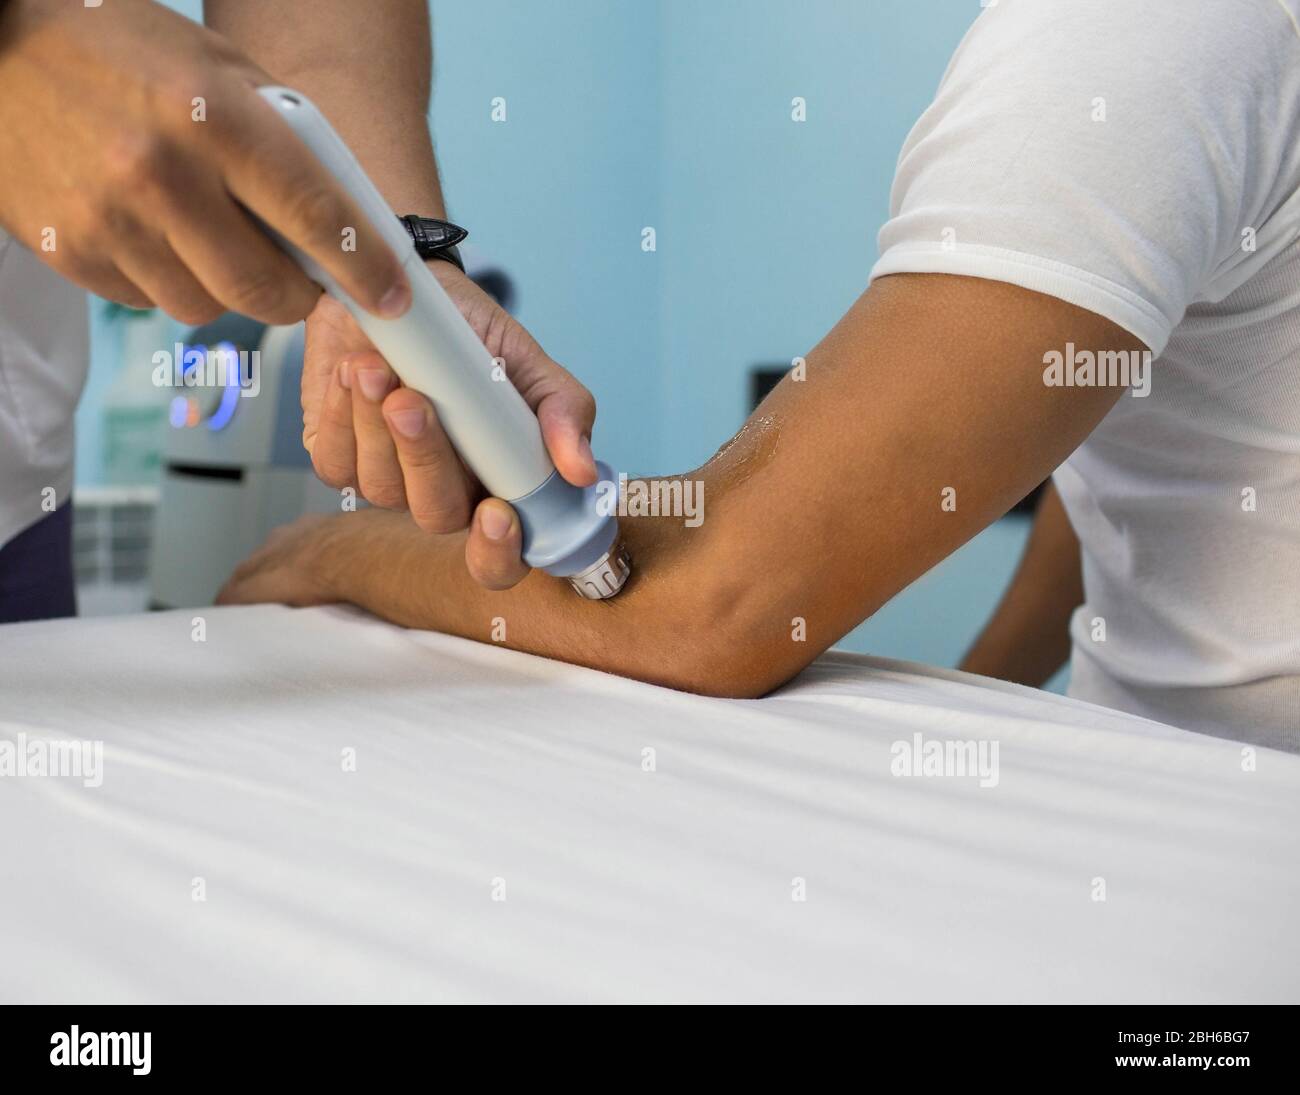 https://c8.alamy.com/comp/2BH6BG7/procedure-shock-wave-therapy-at-clinic-physiotherapist-treatment-pain-on-the-arm-with-shock-wave-equipment-2BH6BG7.jpg